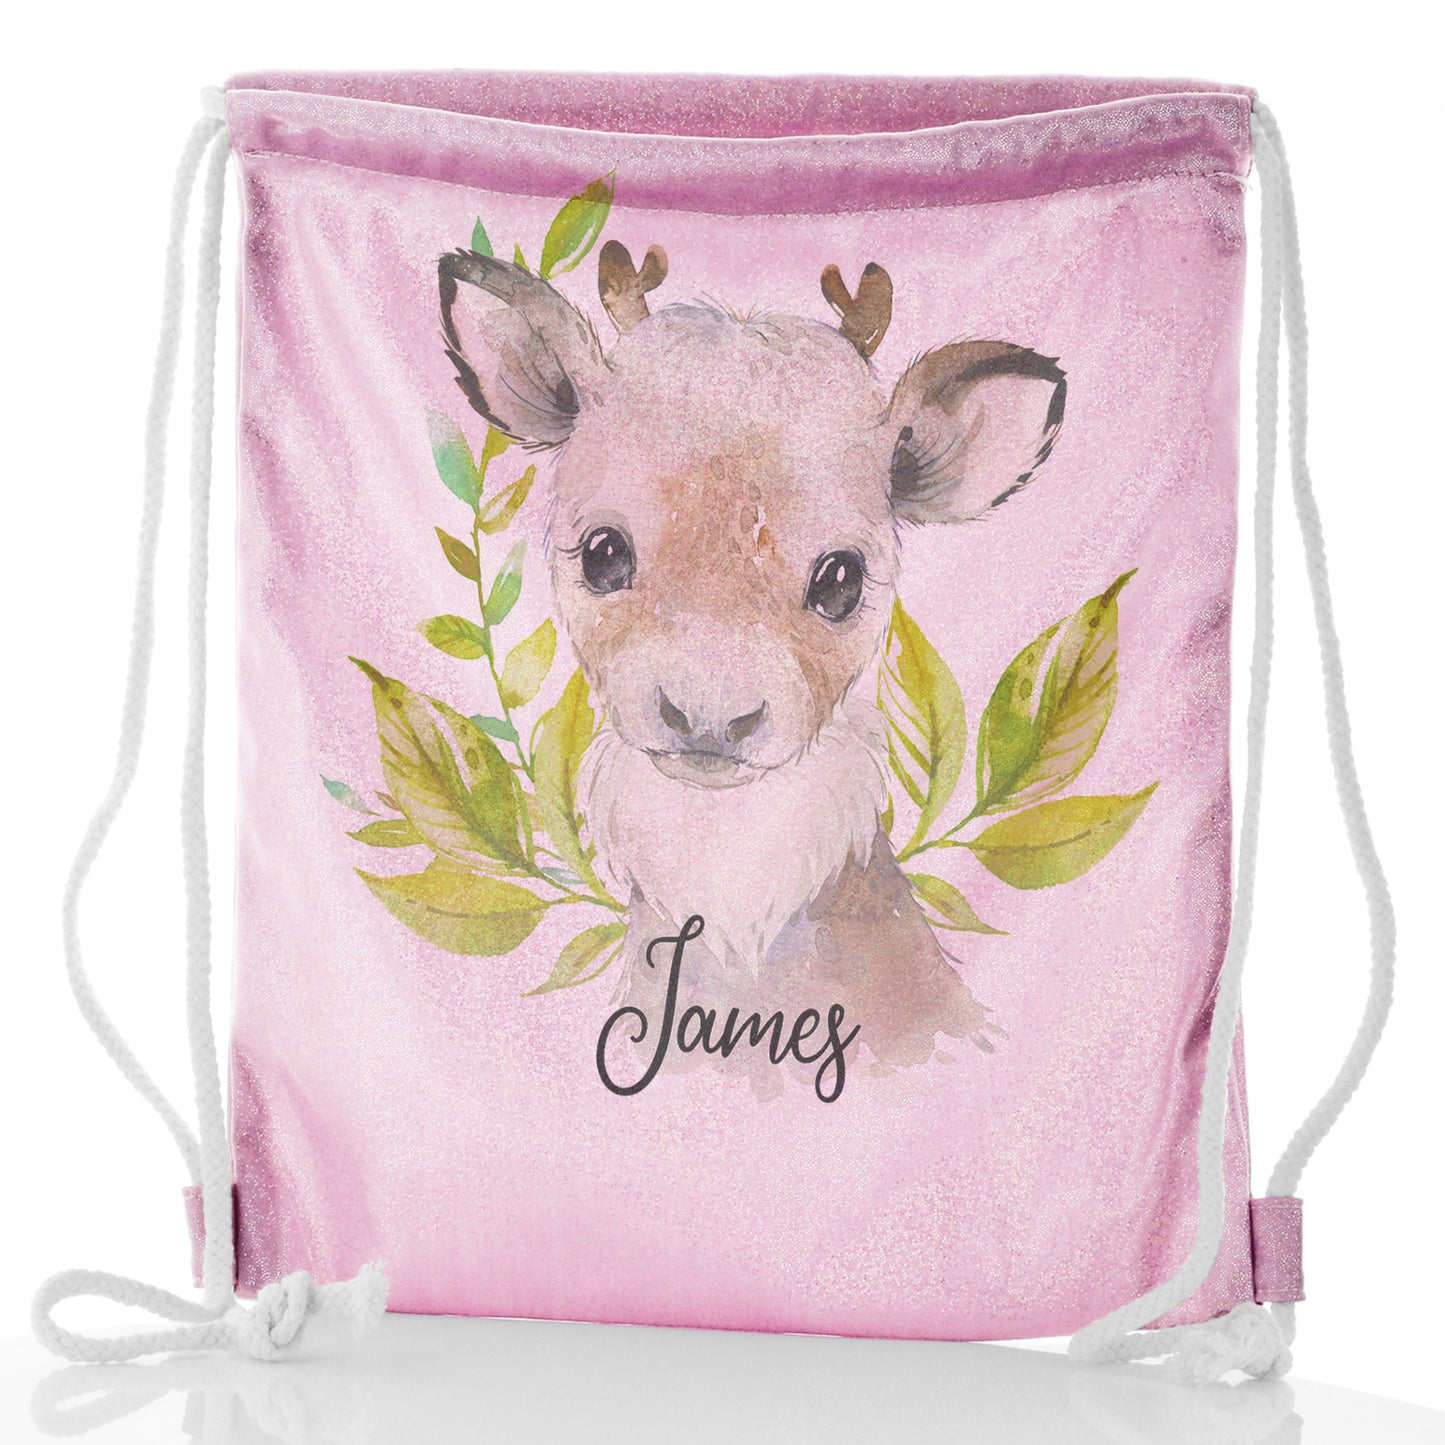 Personalised Glitter Drawstring Backpack with Christmas Reindeer Deer Green Leaves and Cute Text